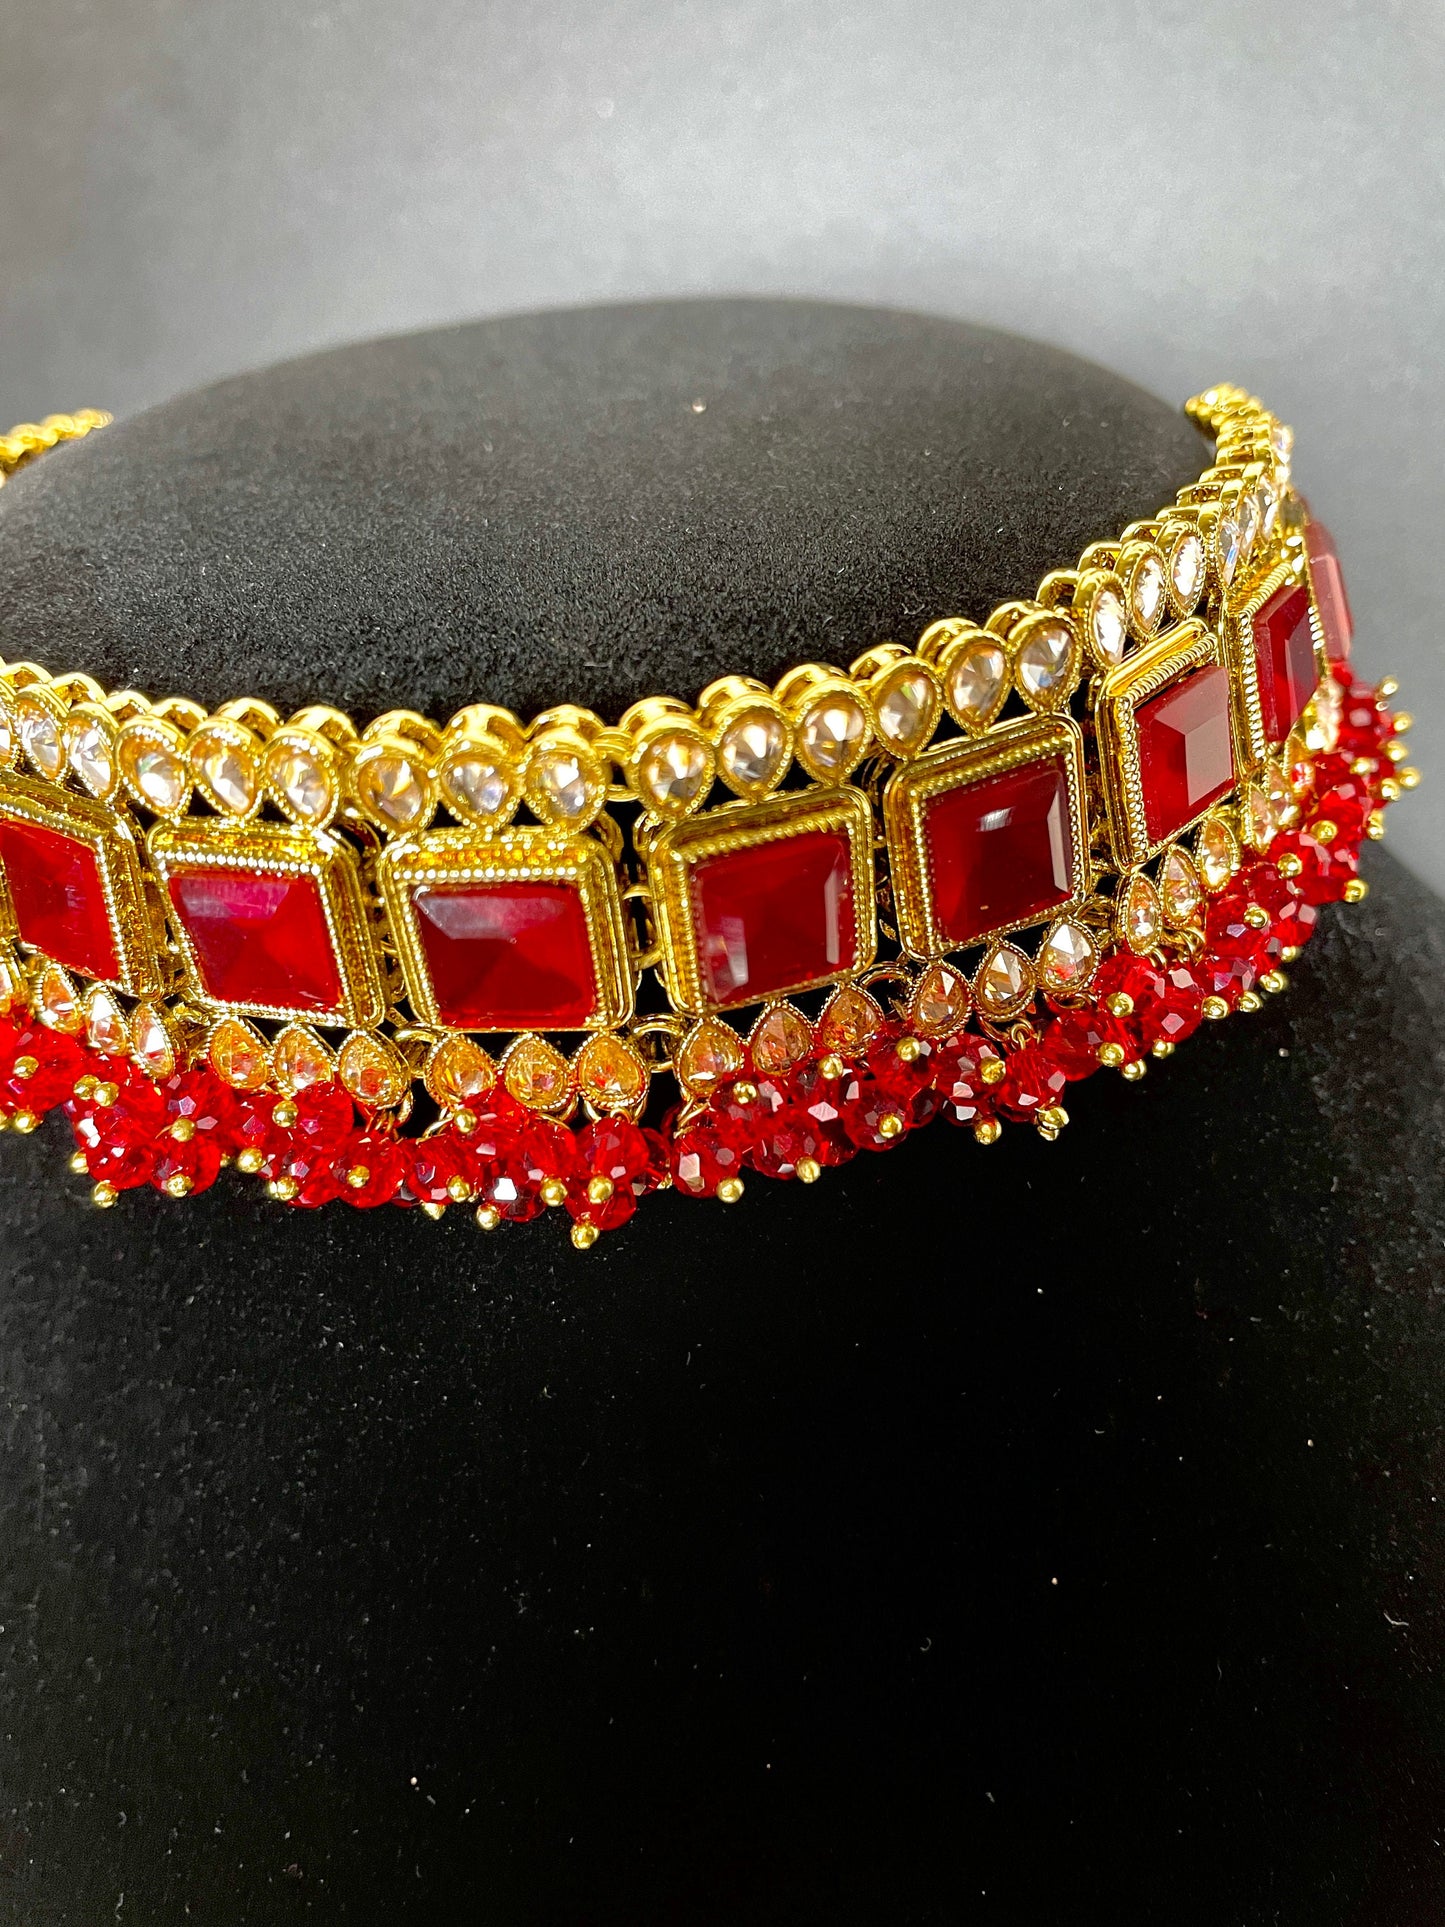 Red and Gold Dainty Choker Set